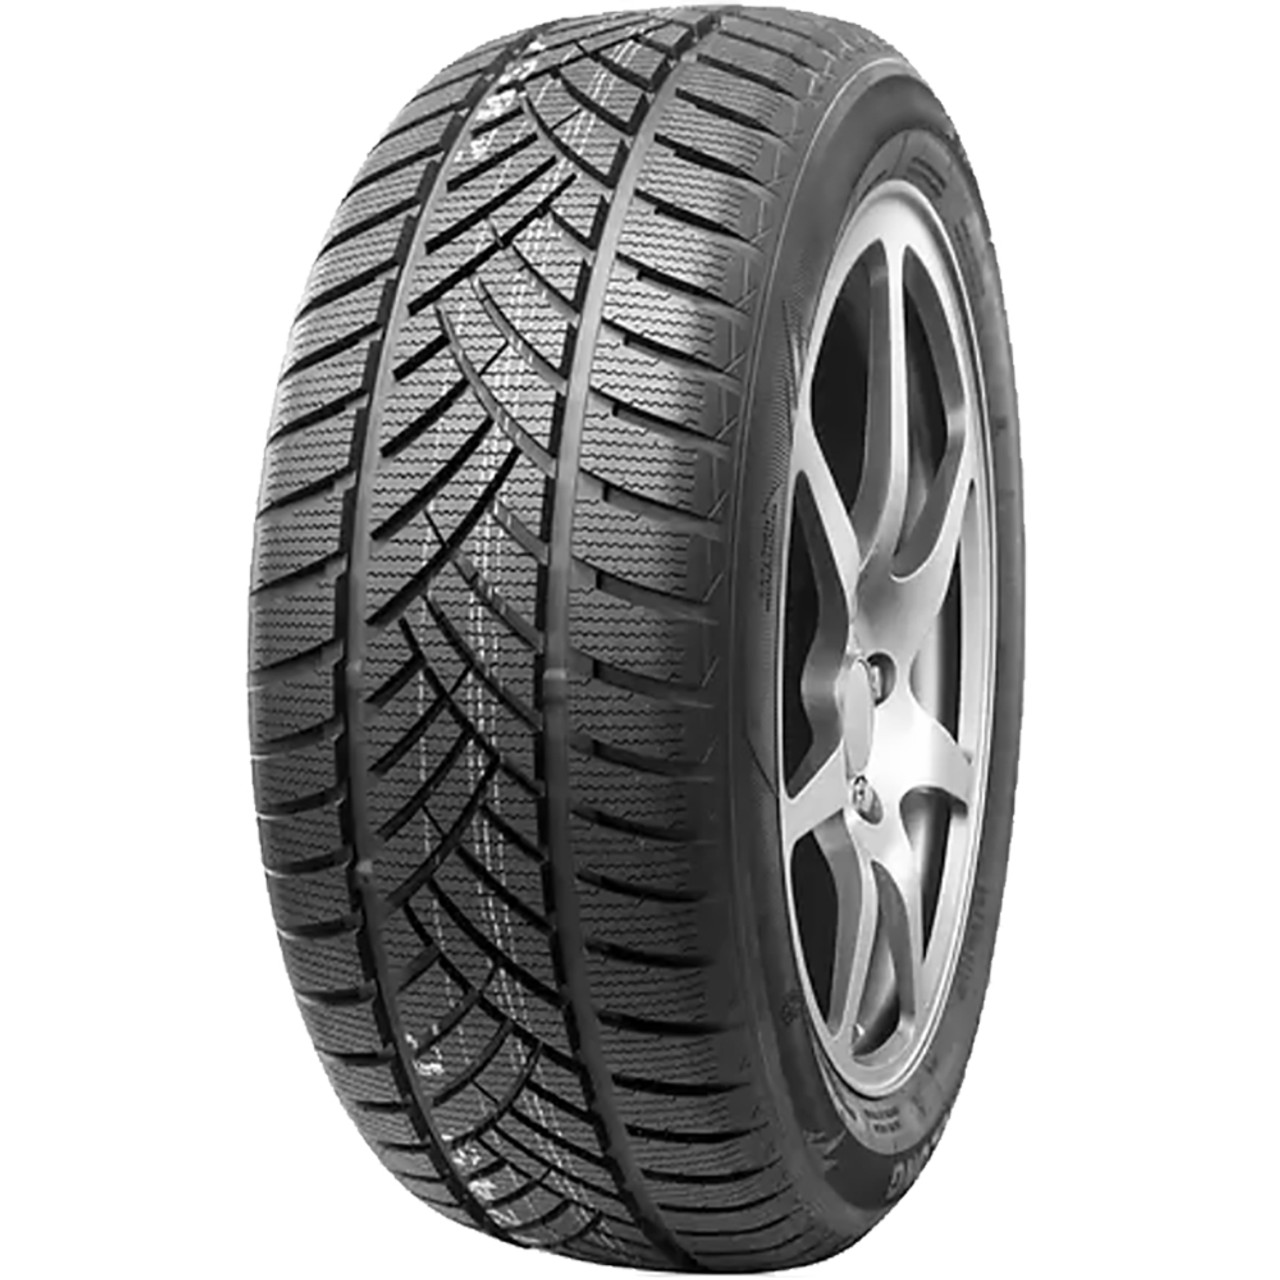 Gomme Nuove Leao 175/65 R14 86H WINT.DEFENDER HP M+S pneumatici nuovi Invernale